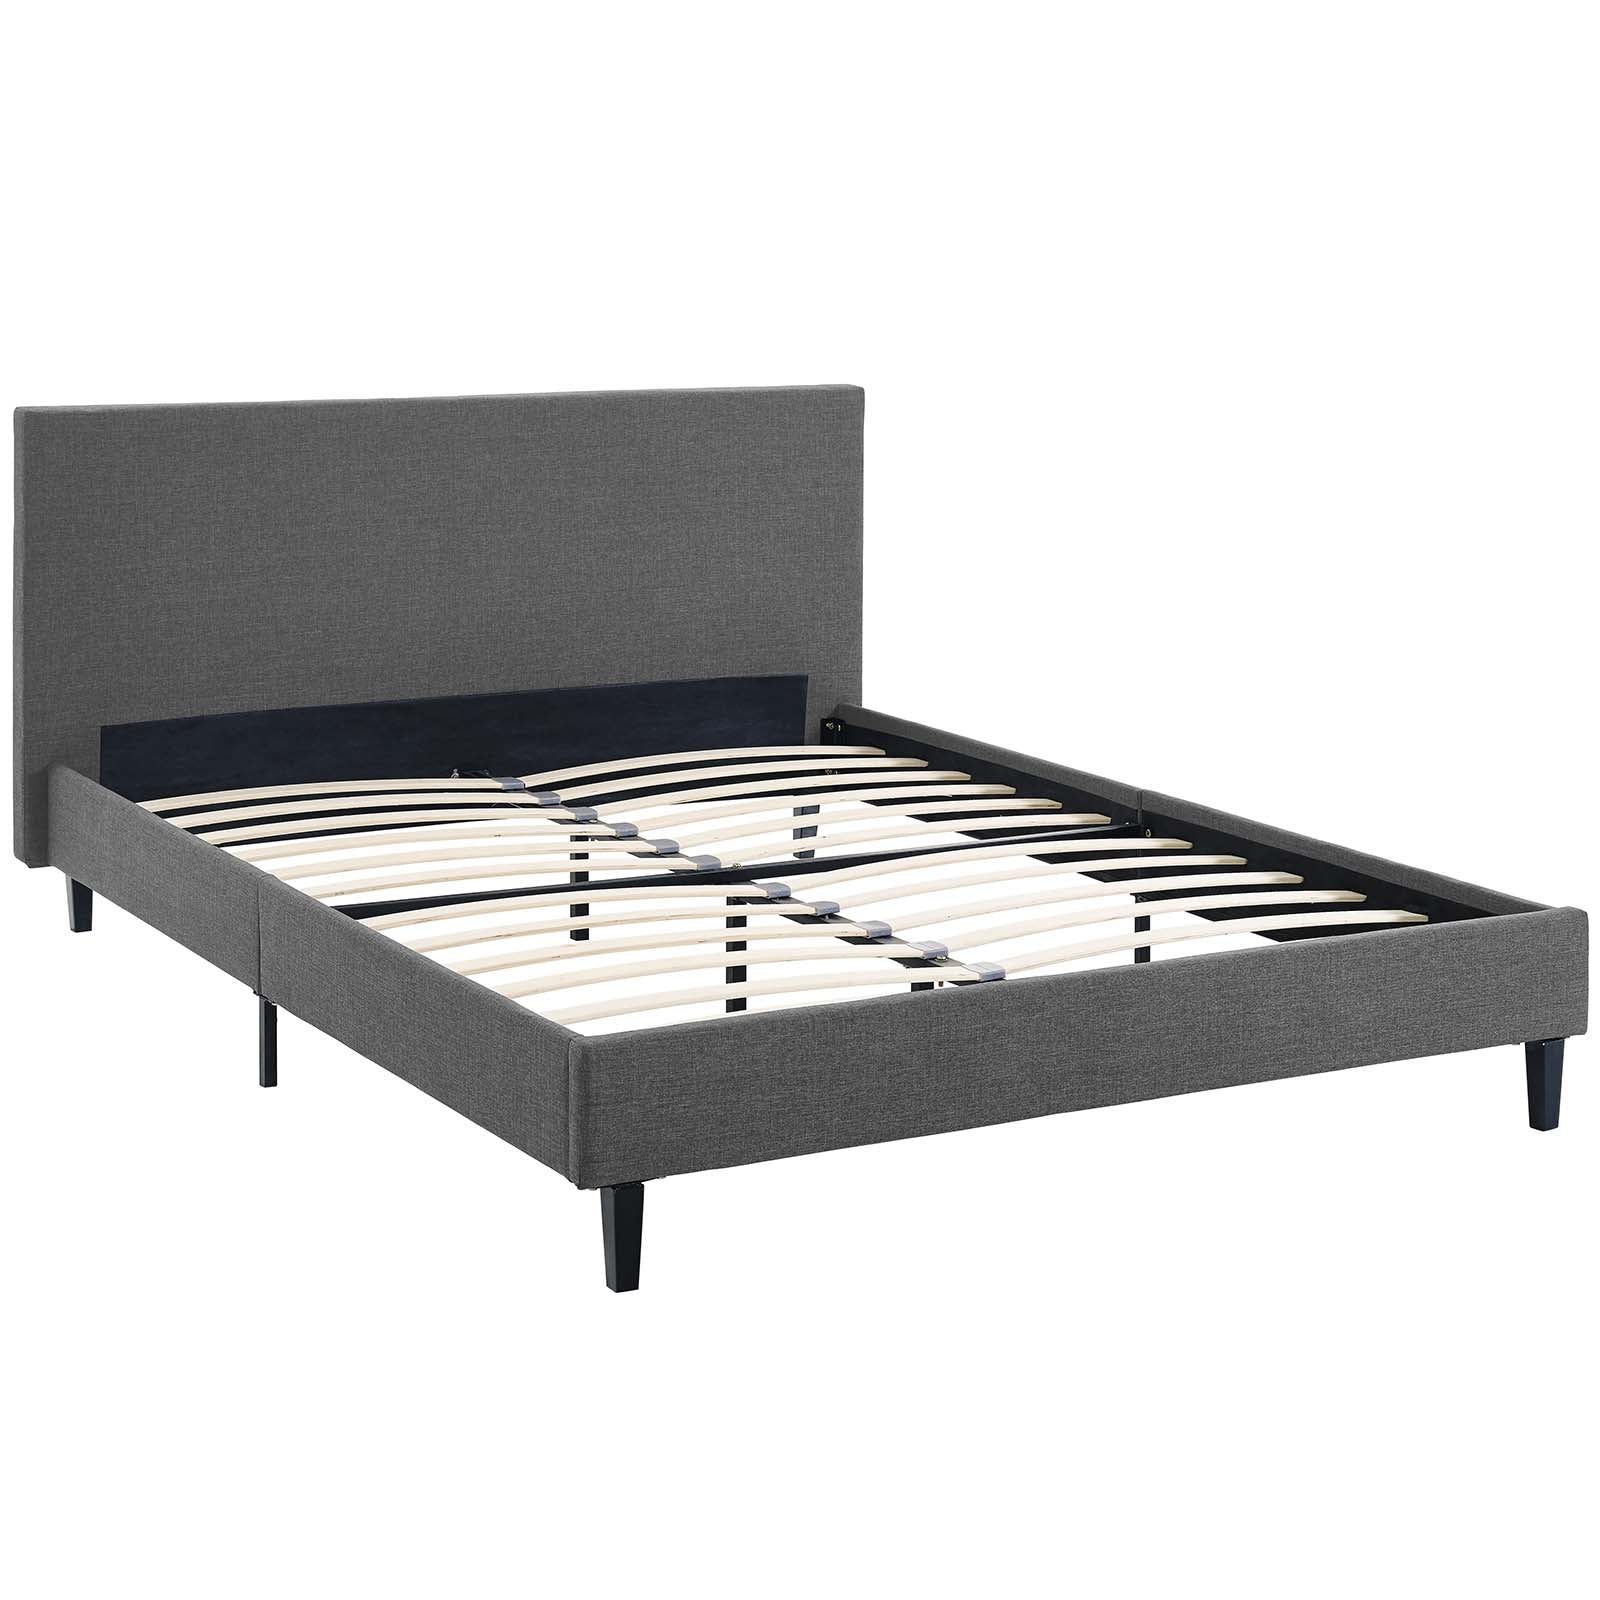 Modway Beds - Anya Full Bed Gray